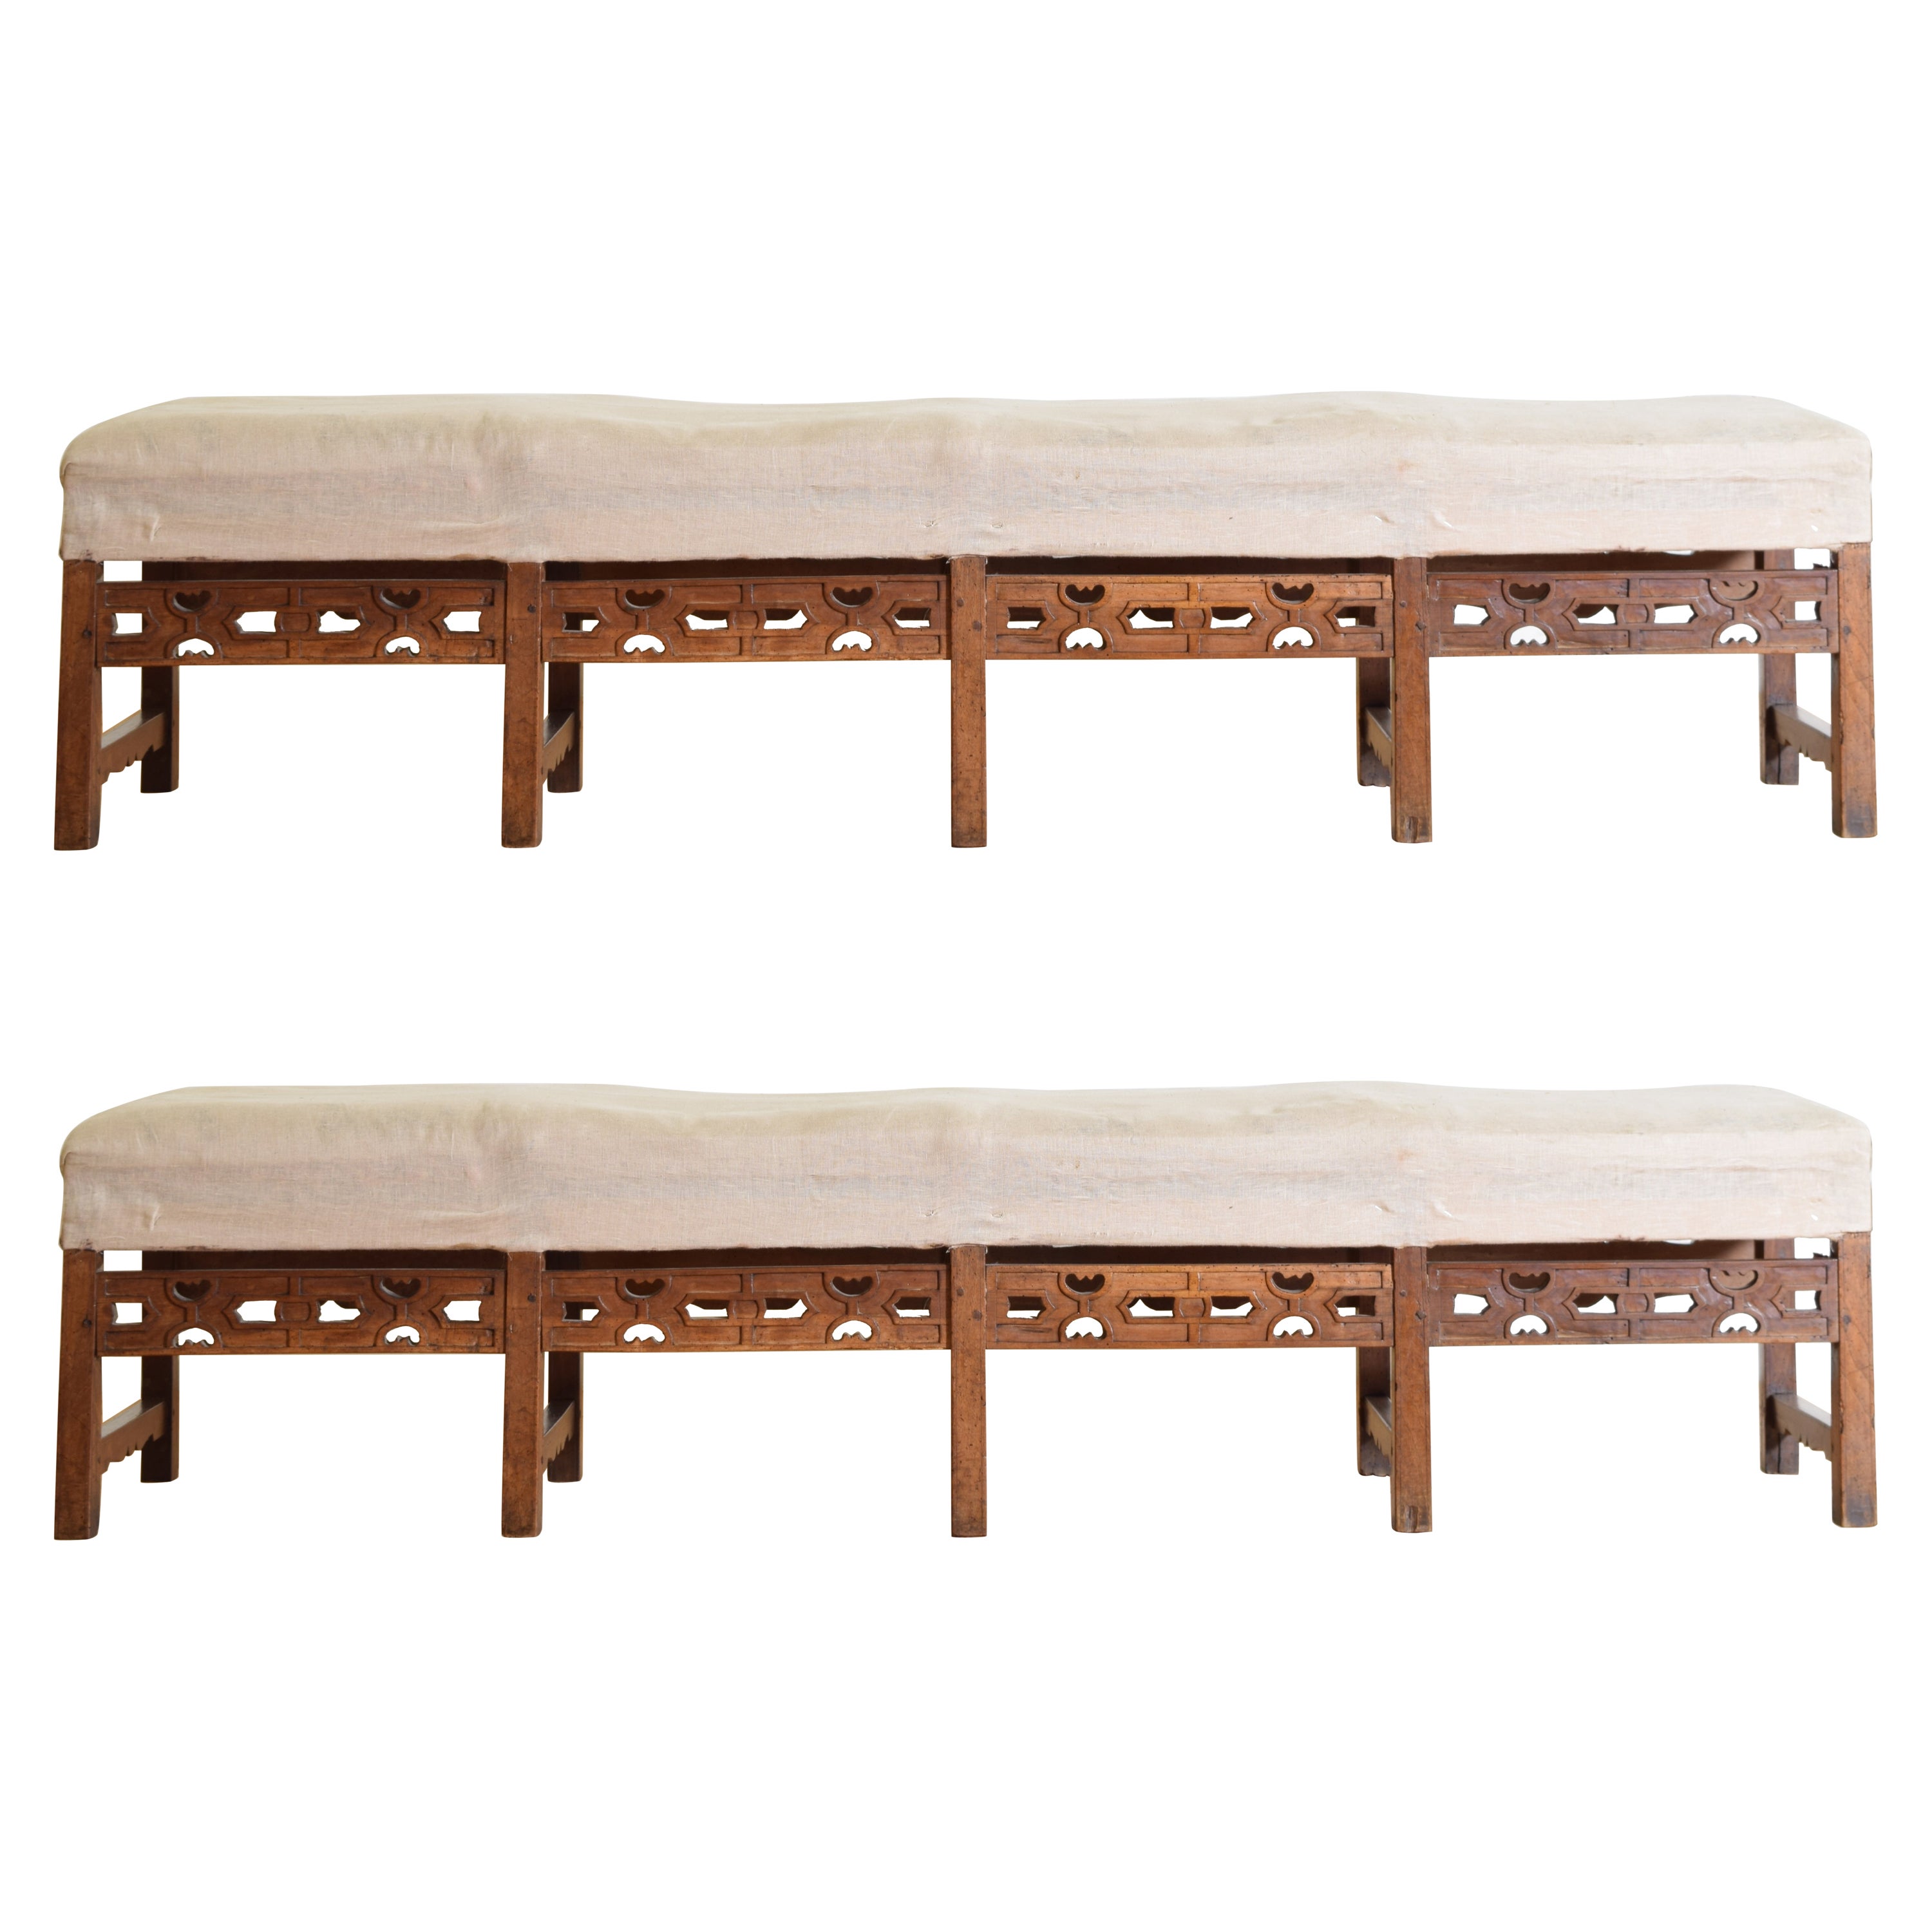 Pair Italian, Lombardia, Baroque Period Carved Walnut Benches, Early 18th C.